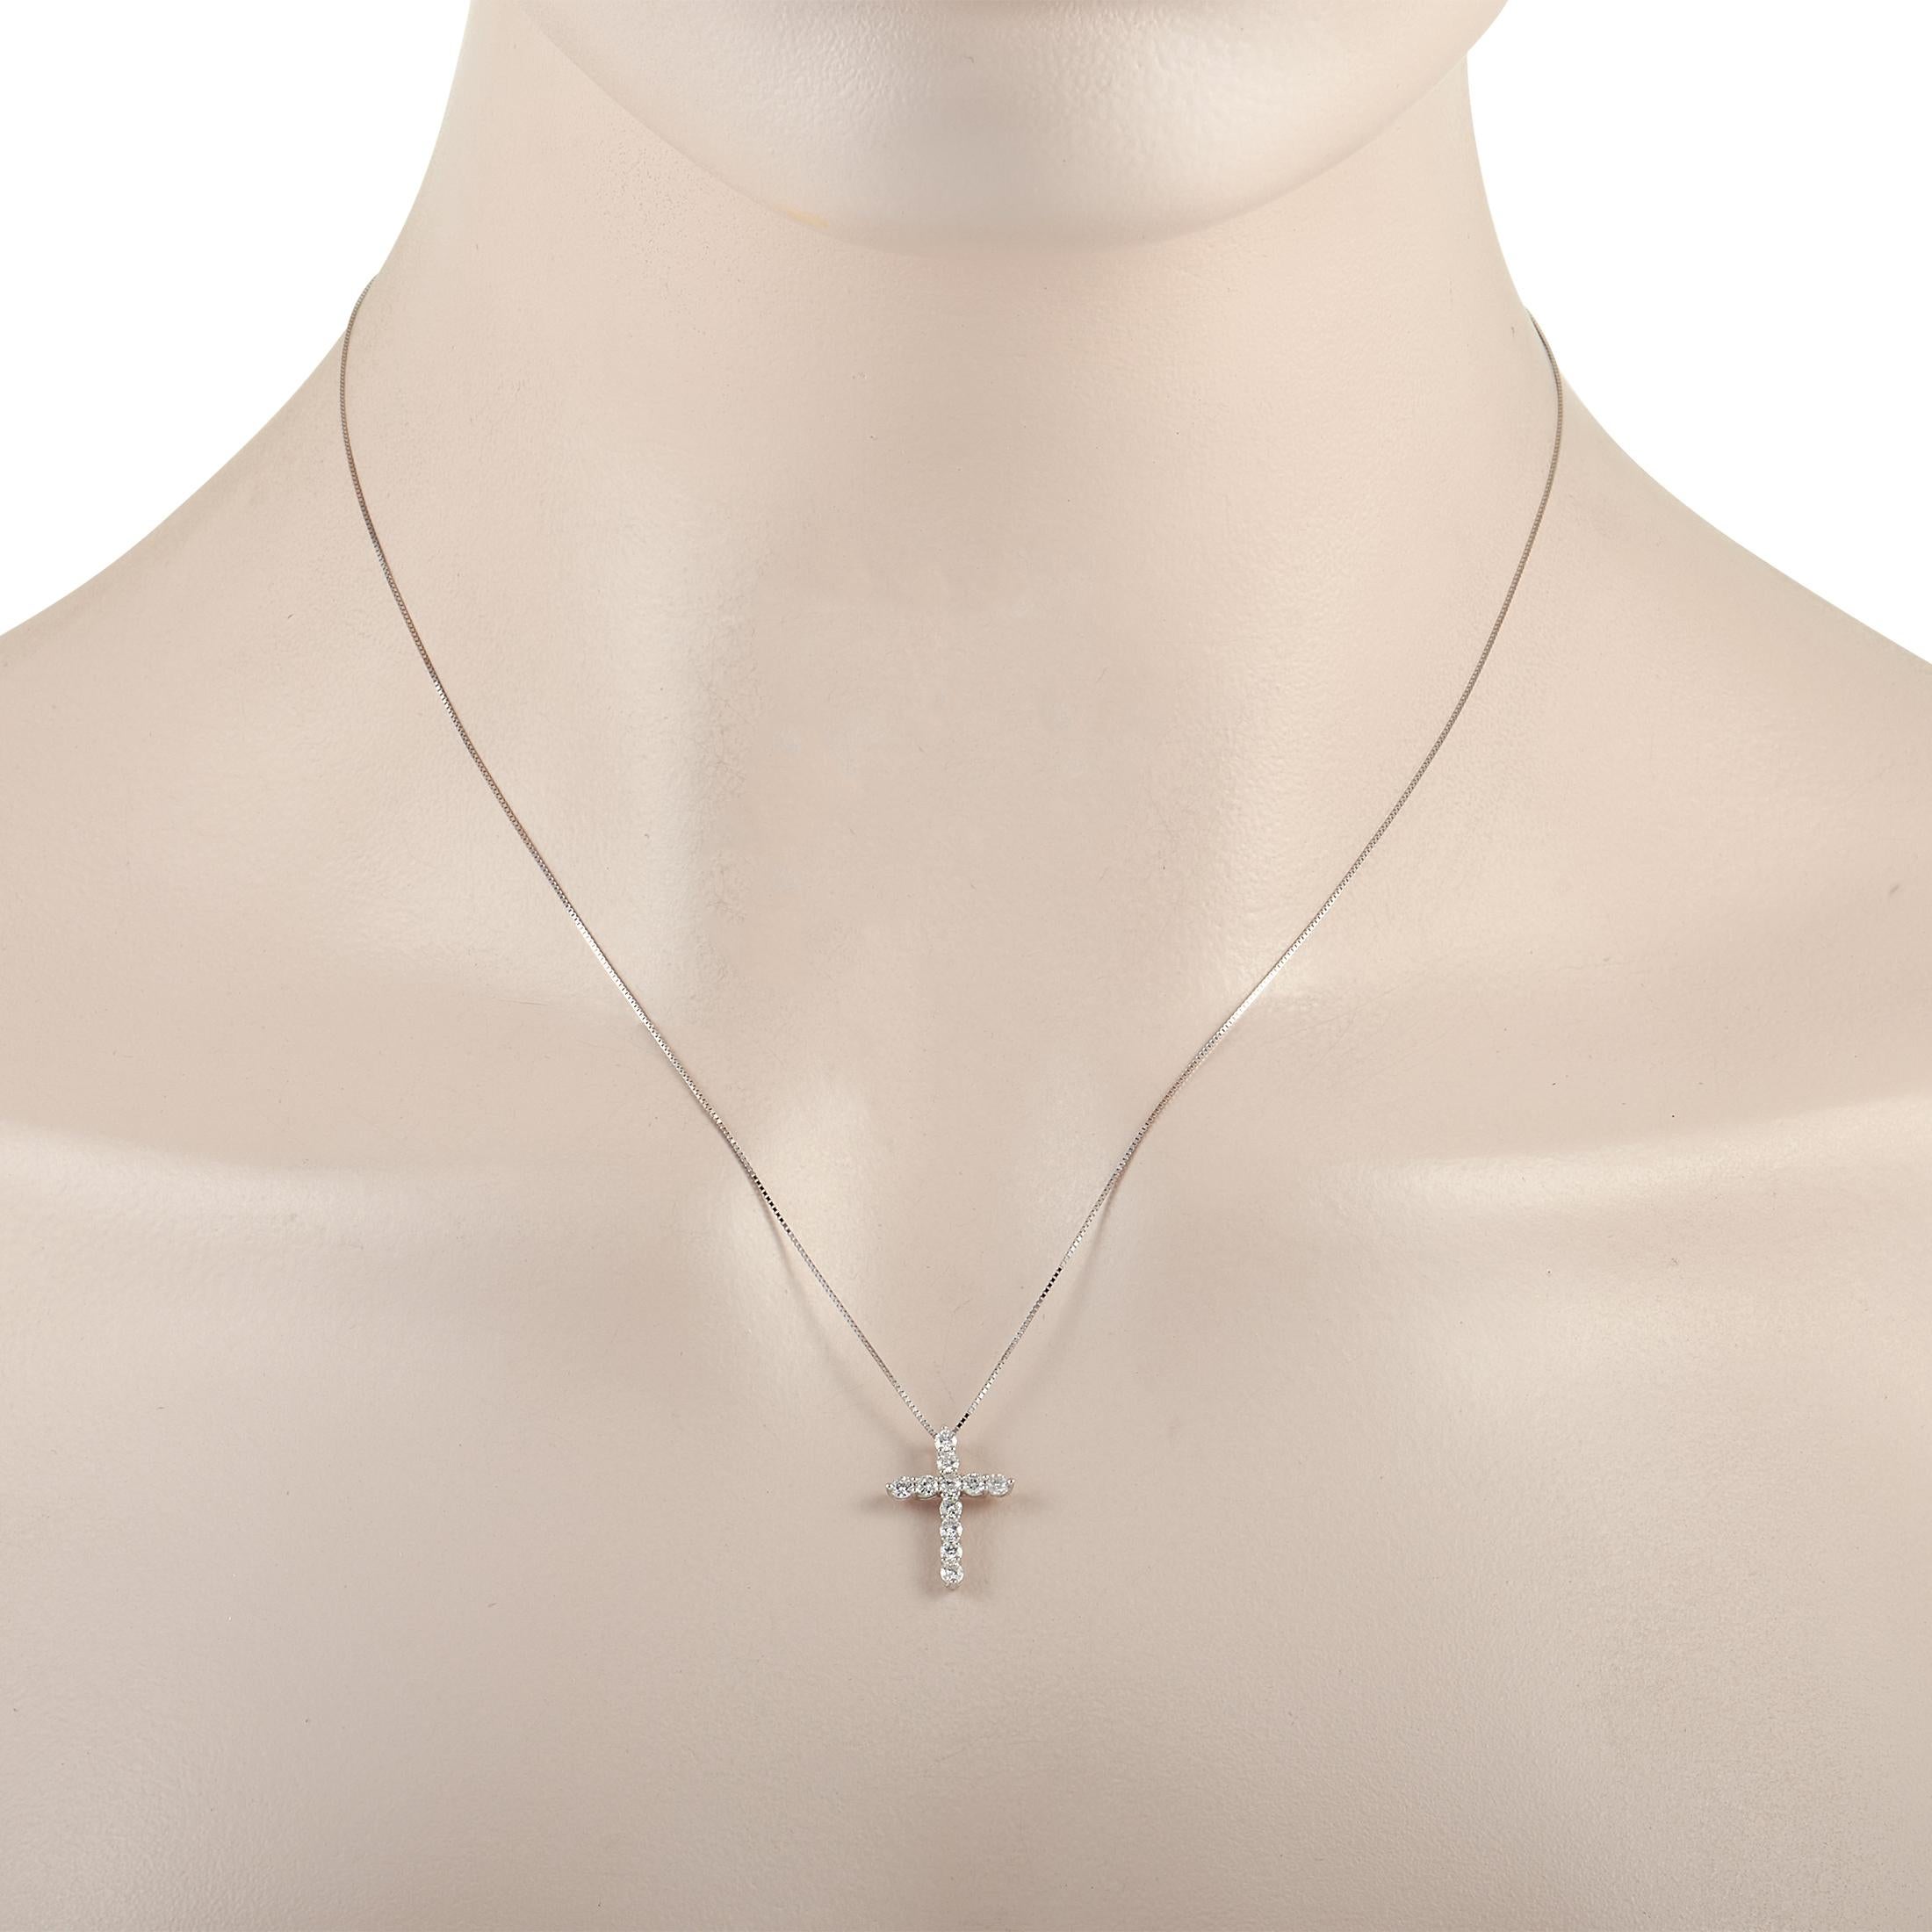 This lovely LB Exclusive 14K White Gold 0.44 ct Diamond Cross Necklace is made with an 14K white gold chain and features a white gold cross pendant set with 0.44 carats of round cut diamonds. The delicate 14K white gold chain measures 17.5 inches in